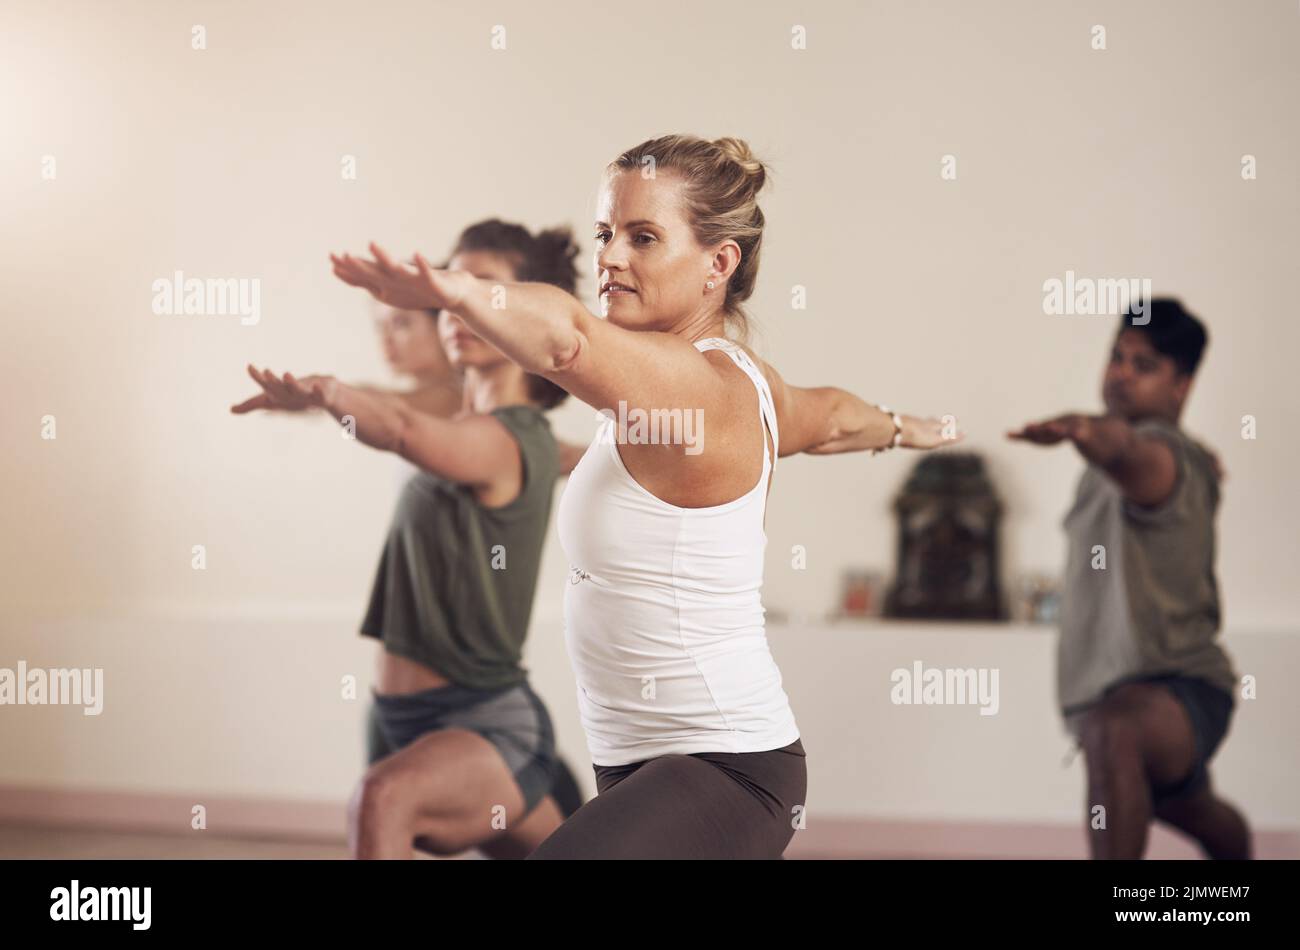 Weve all caught on the yoga bug. a group of young people working out together in a yoga class. Stock Photo